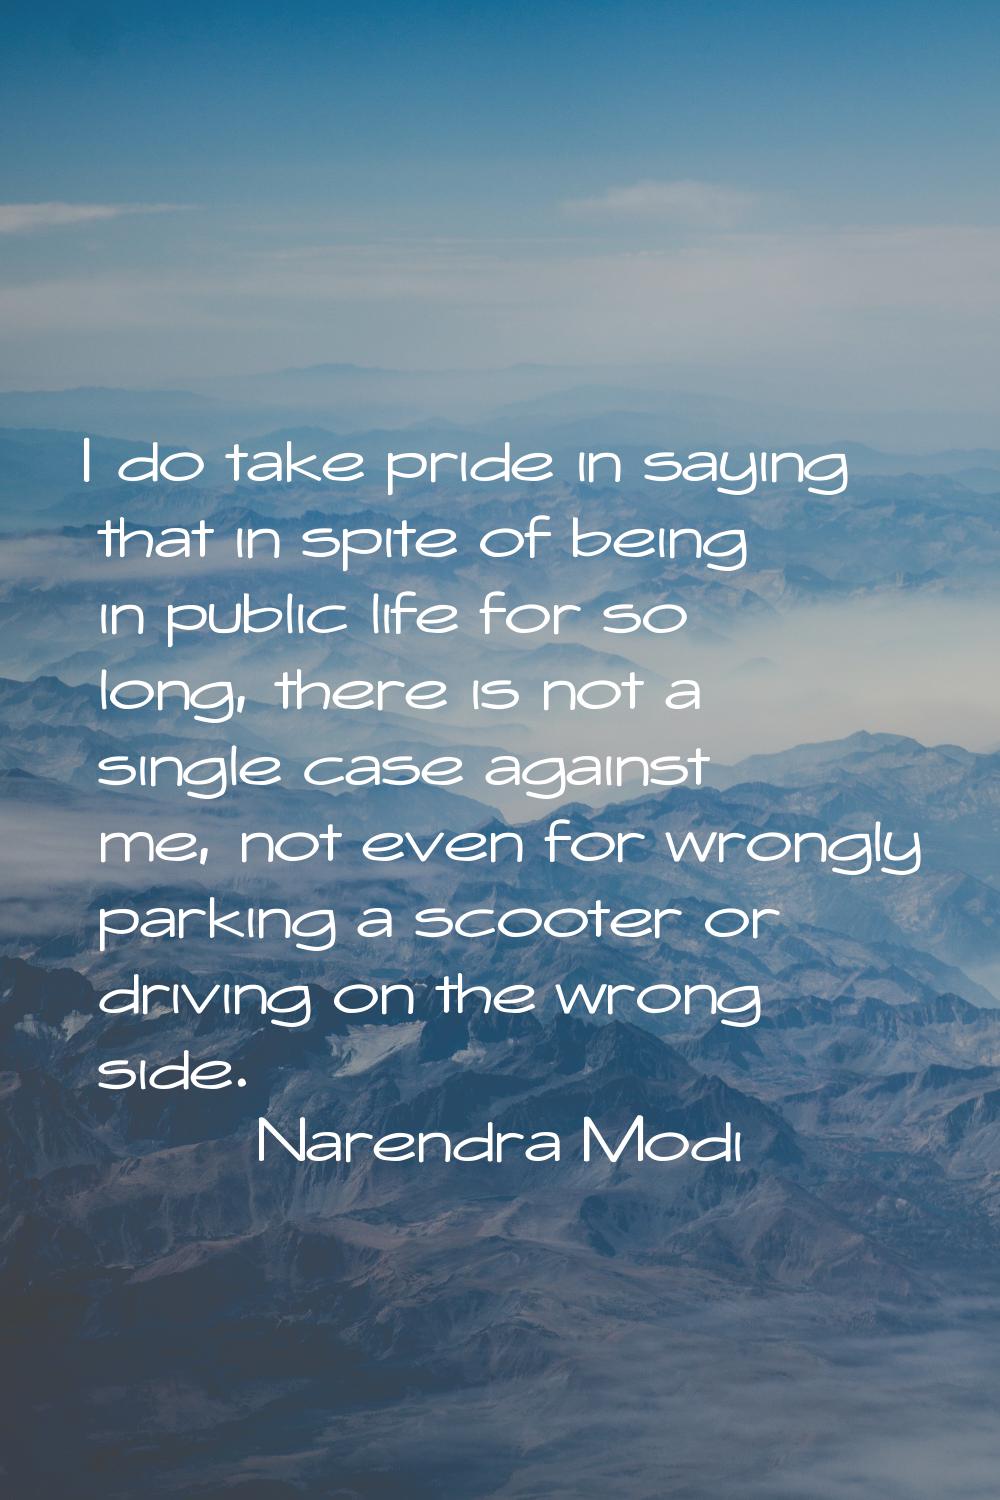 I do take pride in saying that in spite of being in public life for so long, there is not a single 